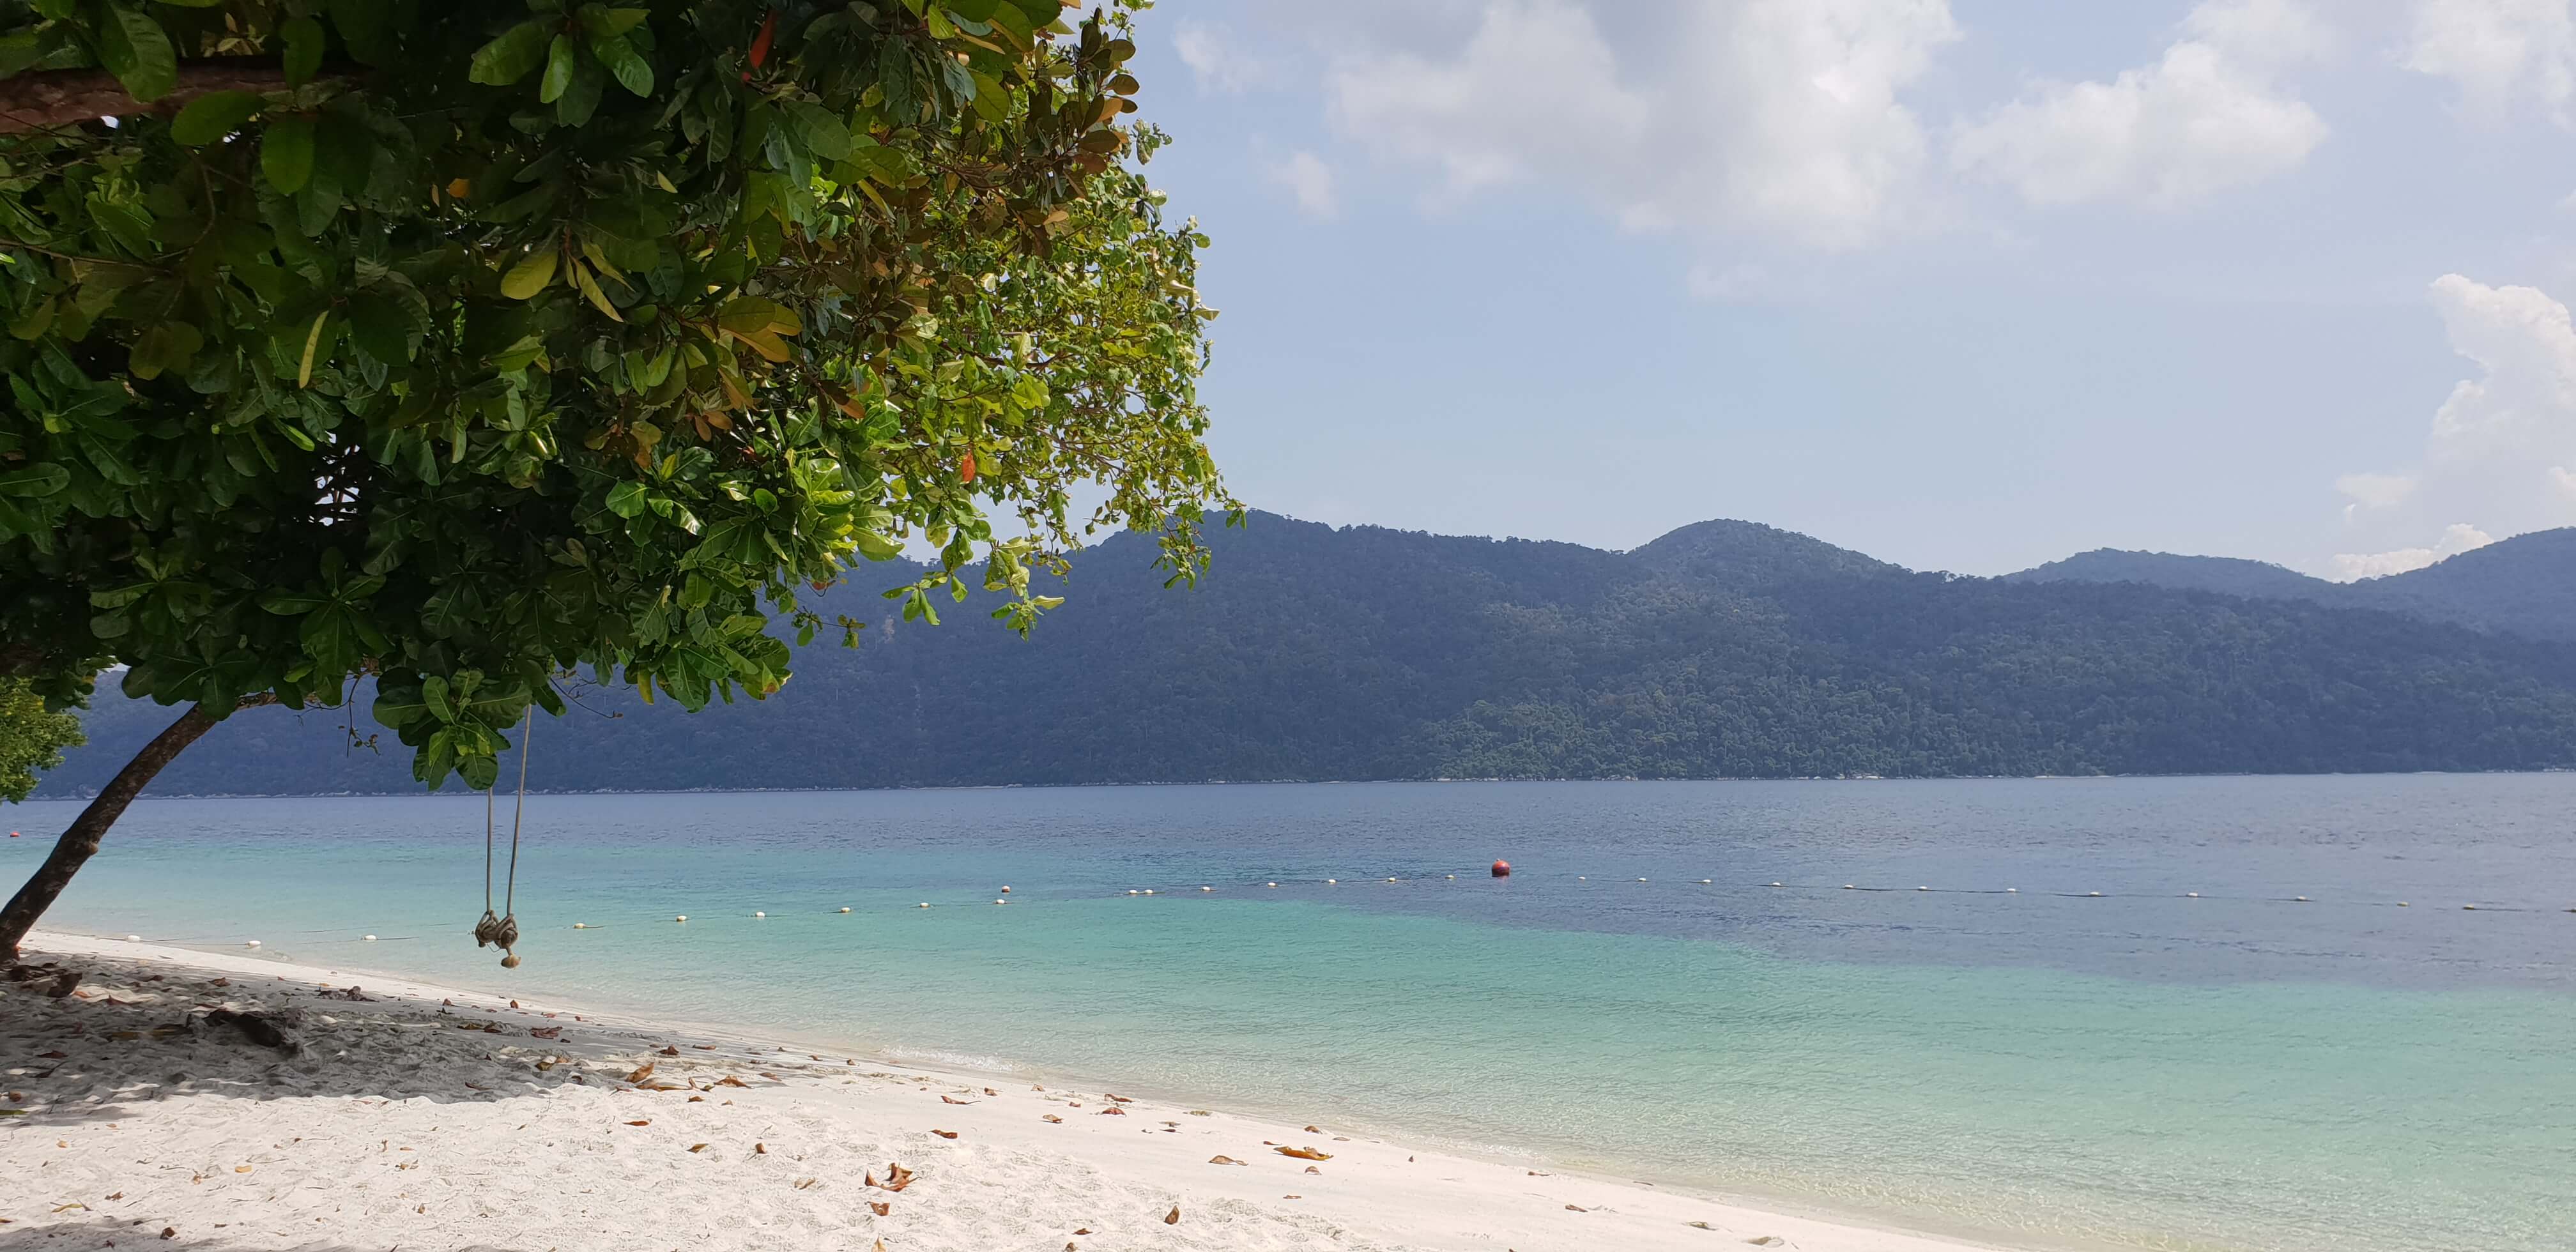 The magnificent island of Koh Rawi covered in Program 1